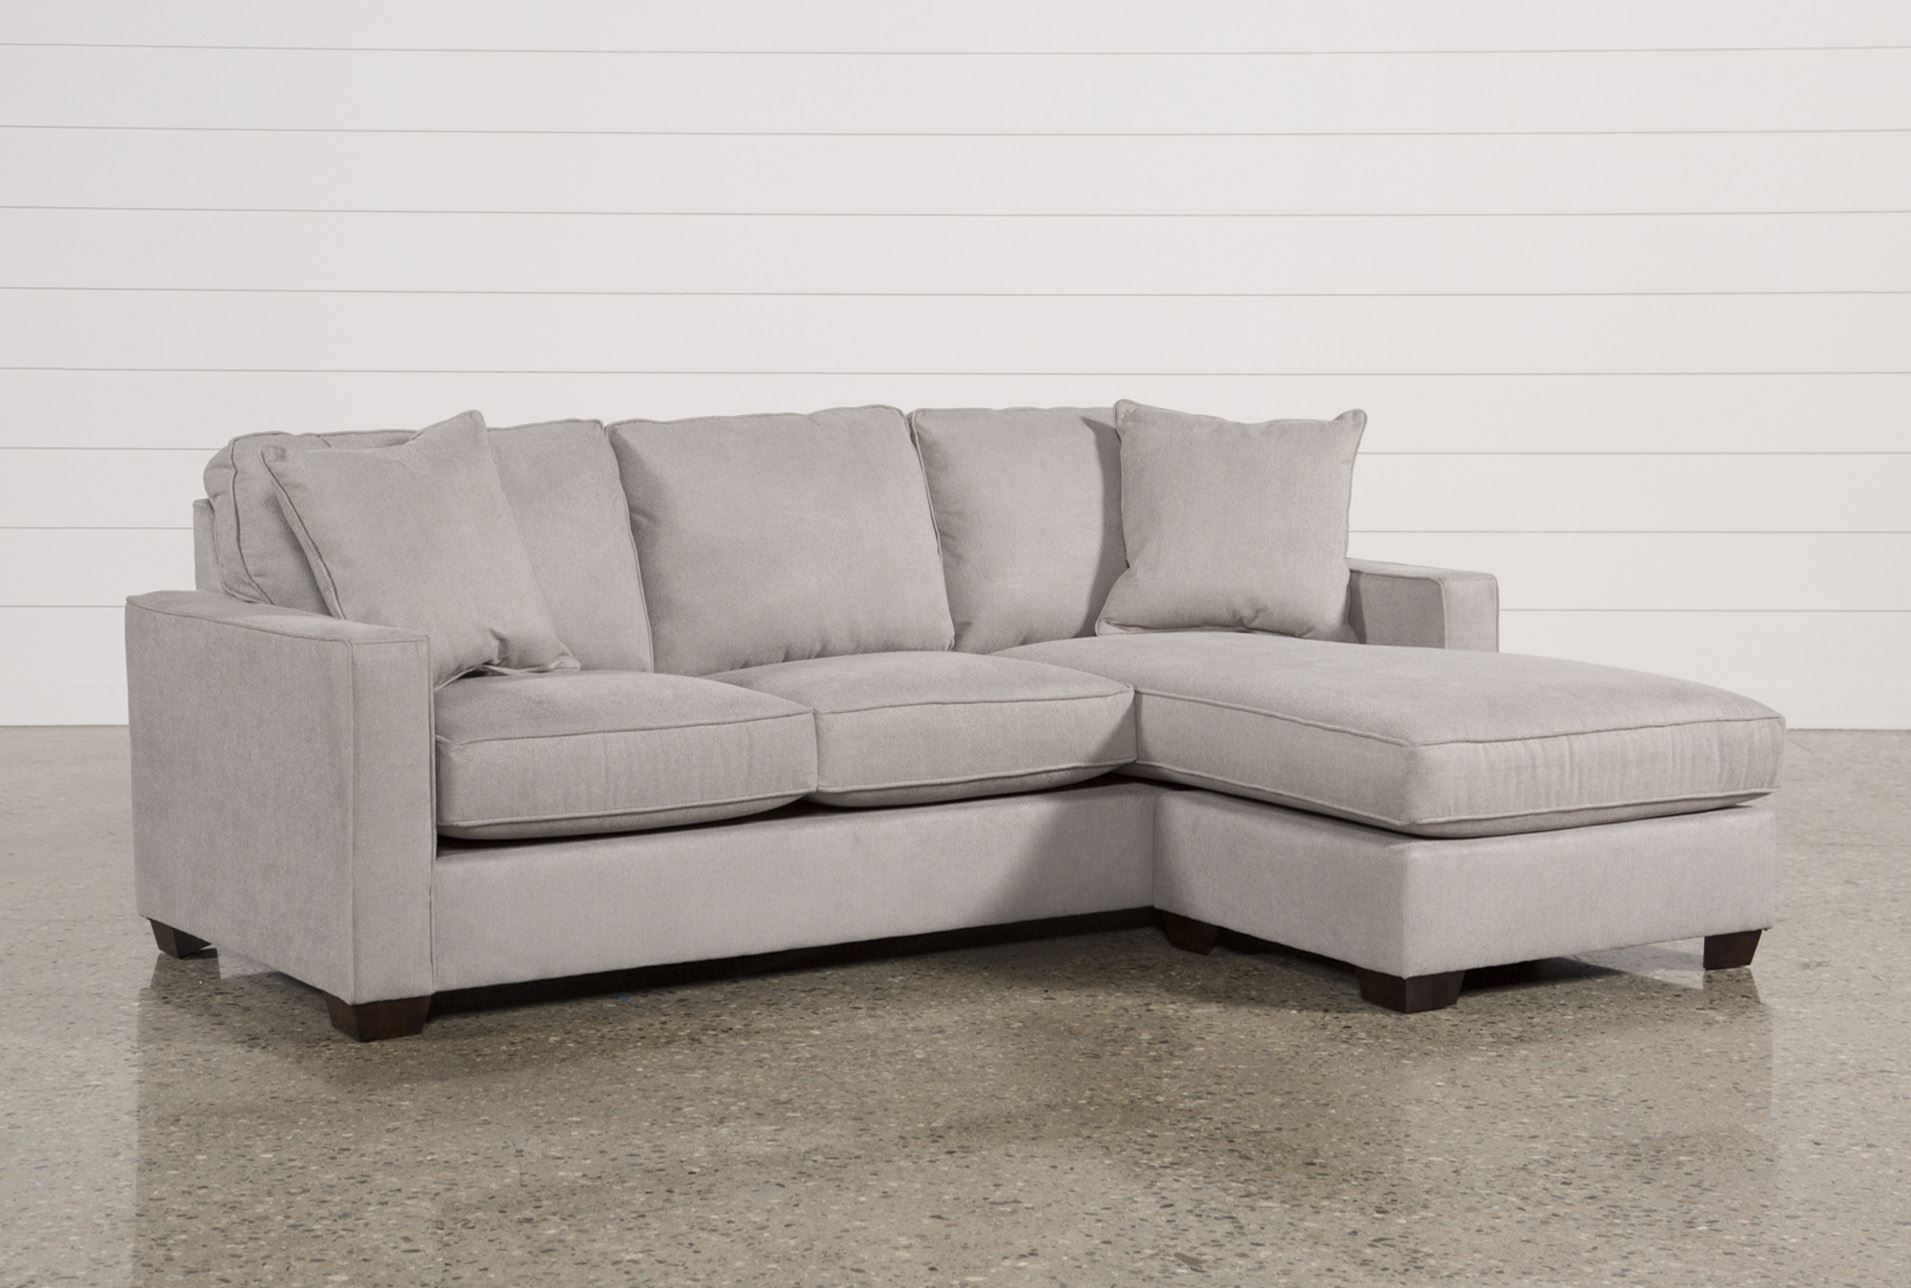 Abson Living Bedford Gray Linen Convertible Sleeper Sectional For Abbyson Sectional Sofa (View 9 of 12)